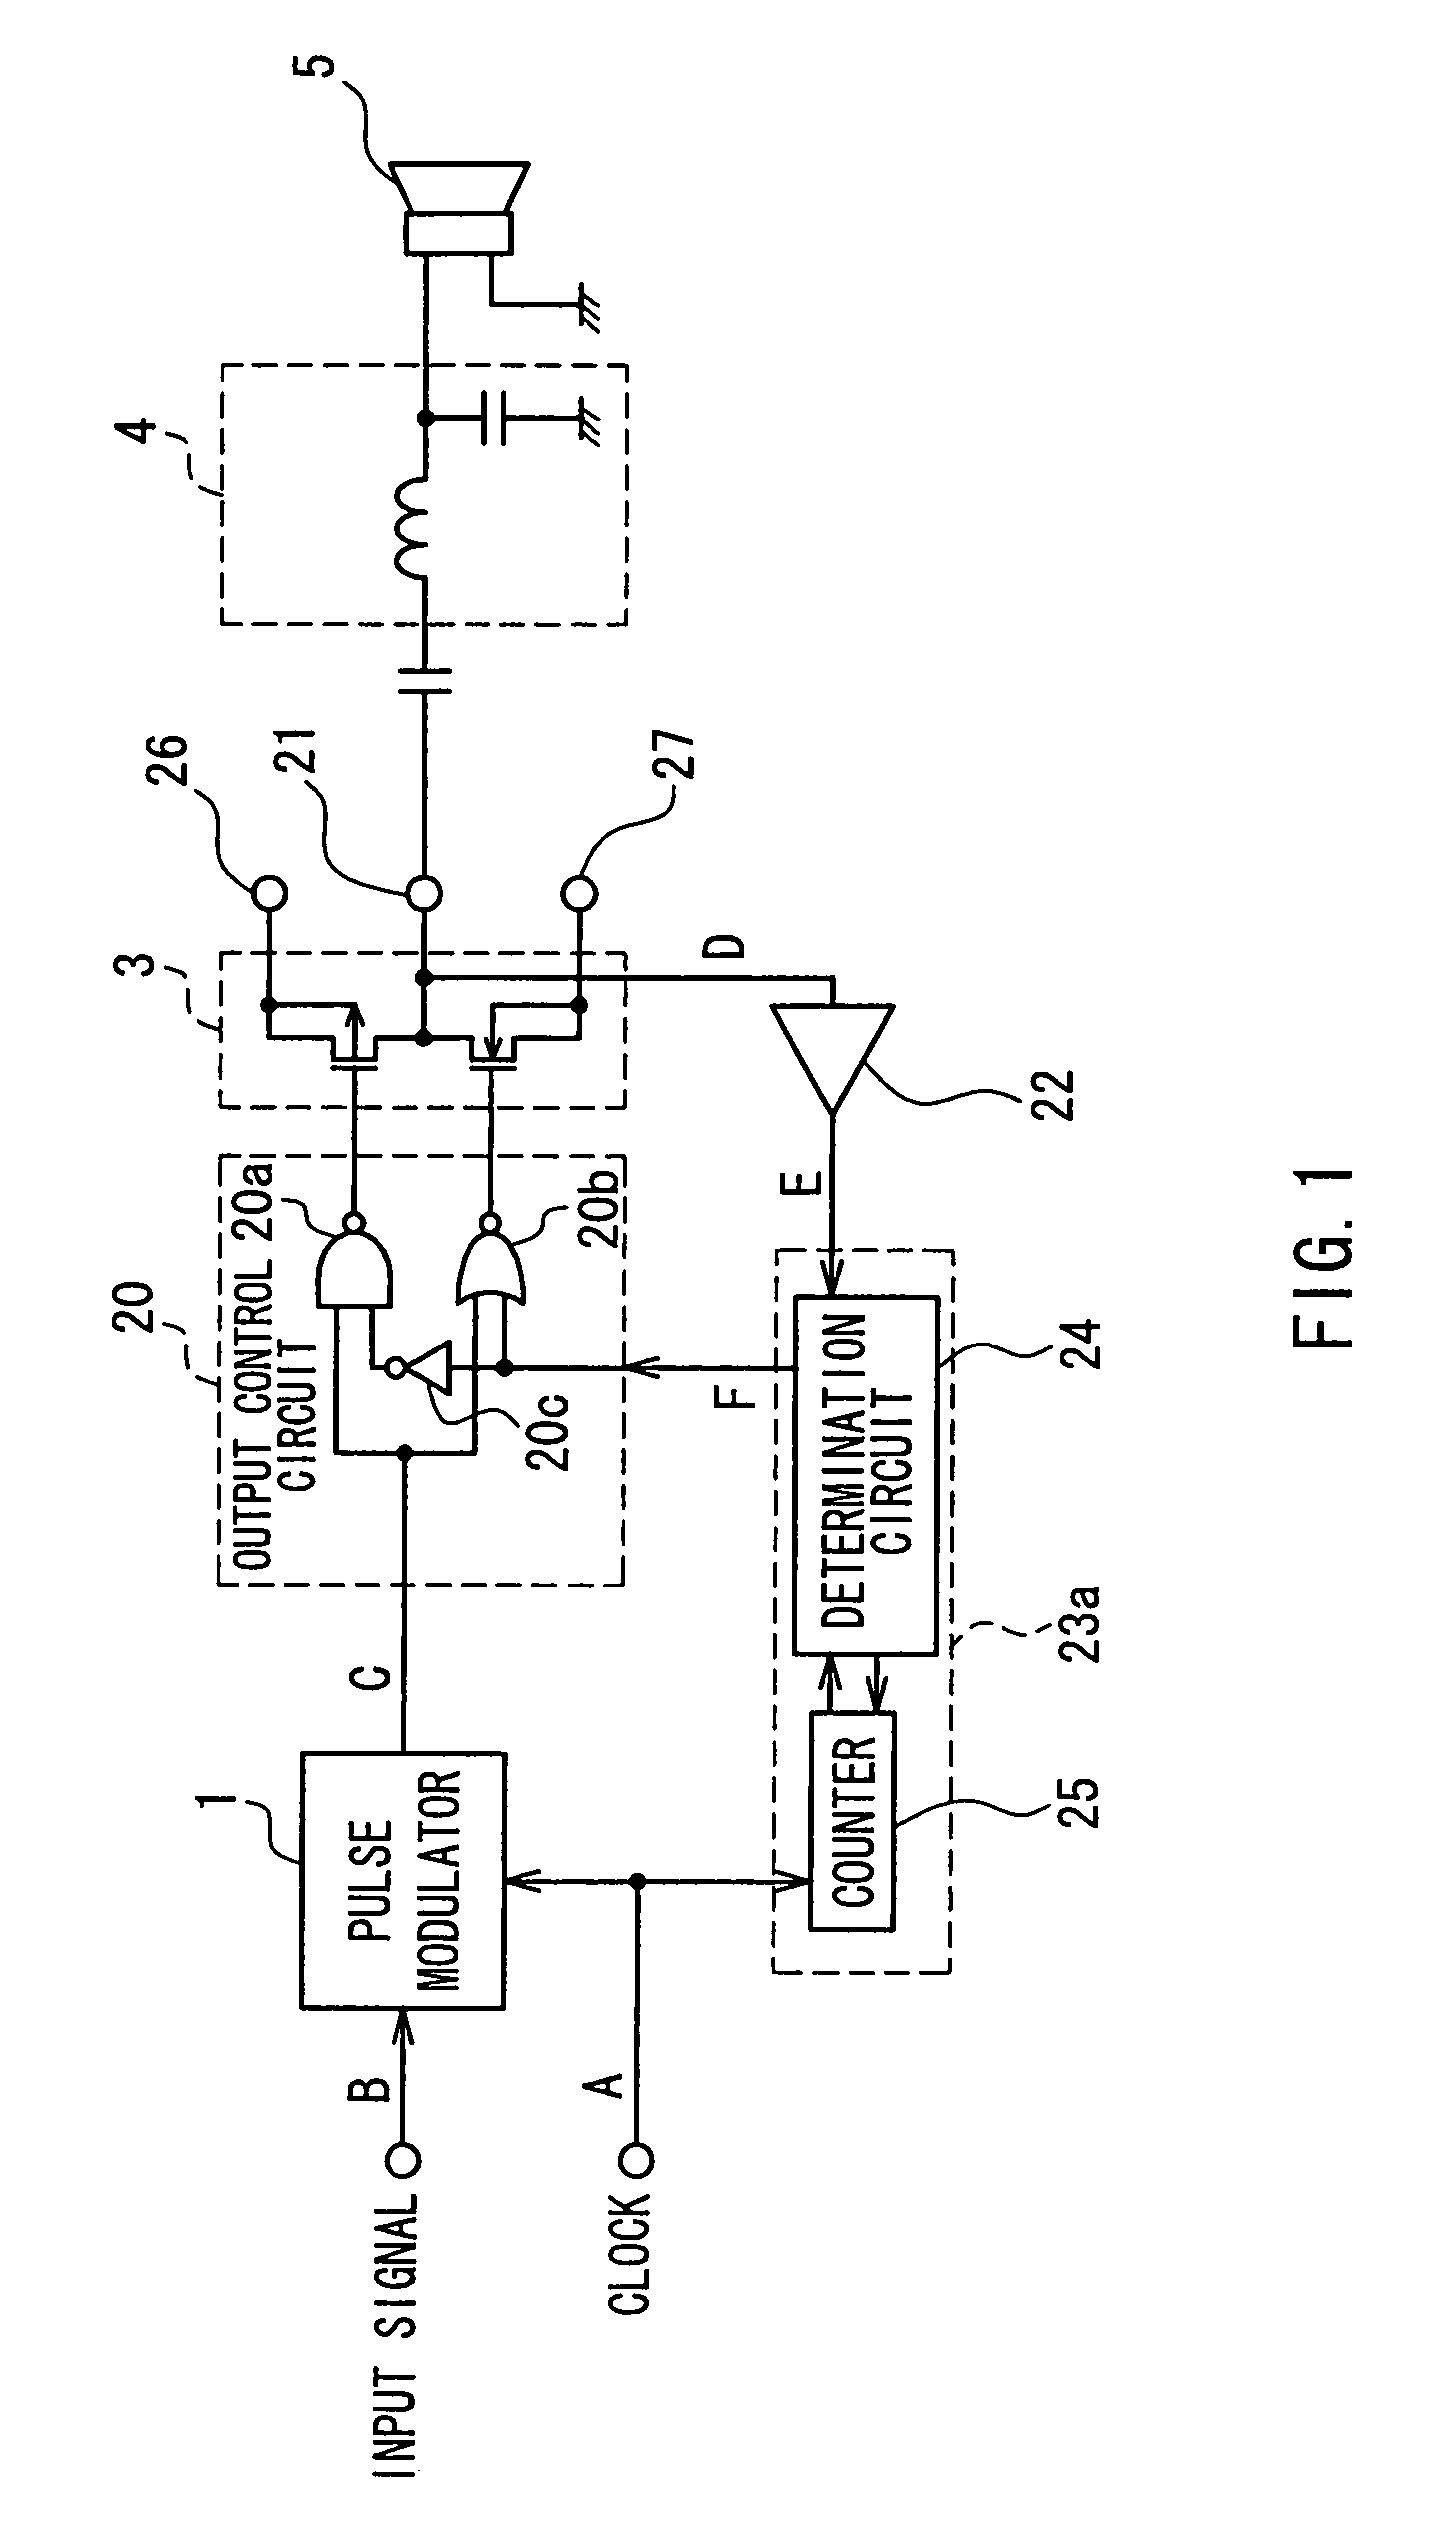 Pulse modulation type electric power amplifier